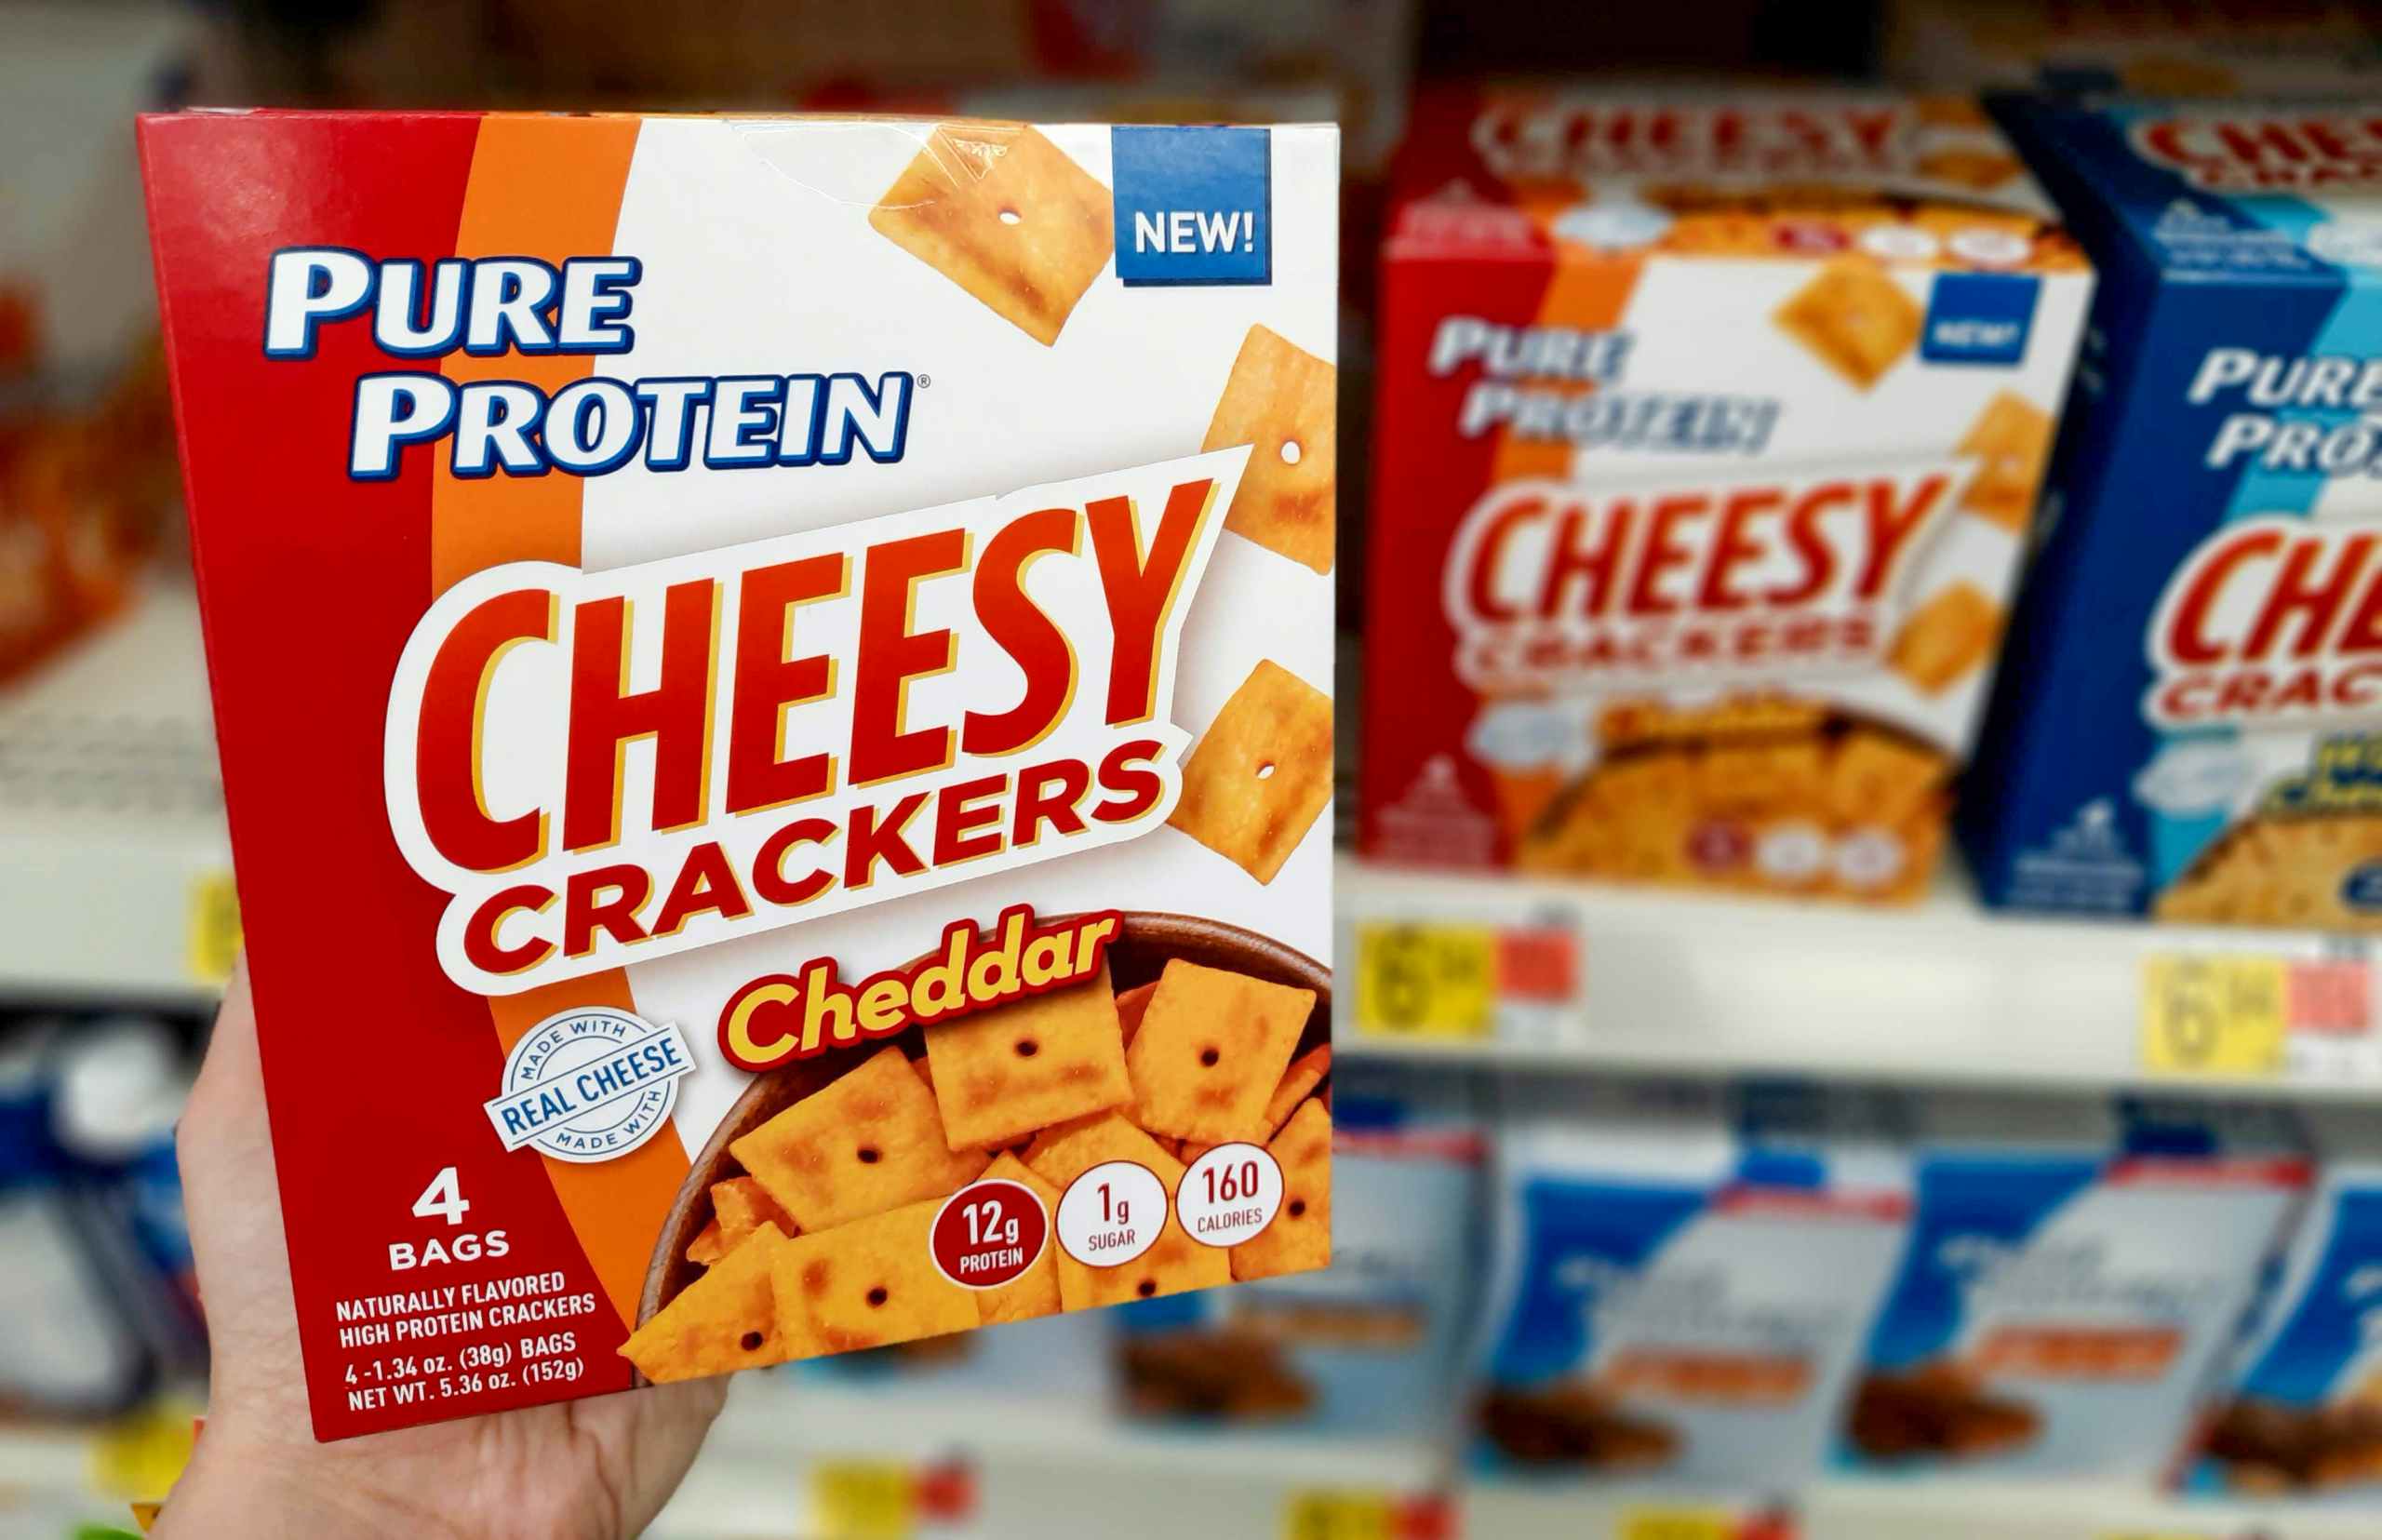 Pure Protein Cheesy Crackers at Walmart